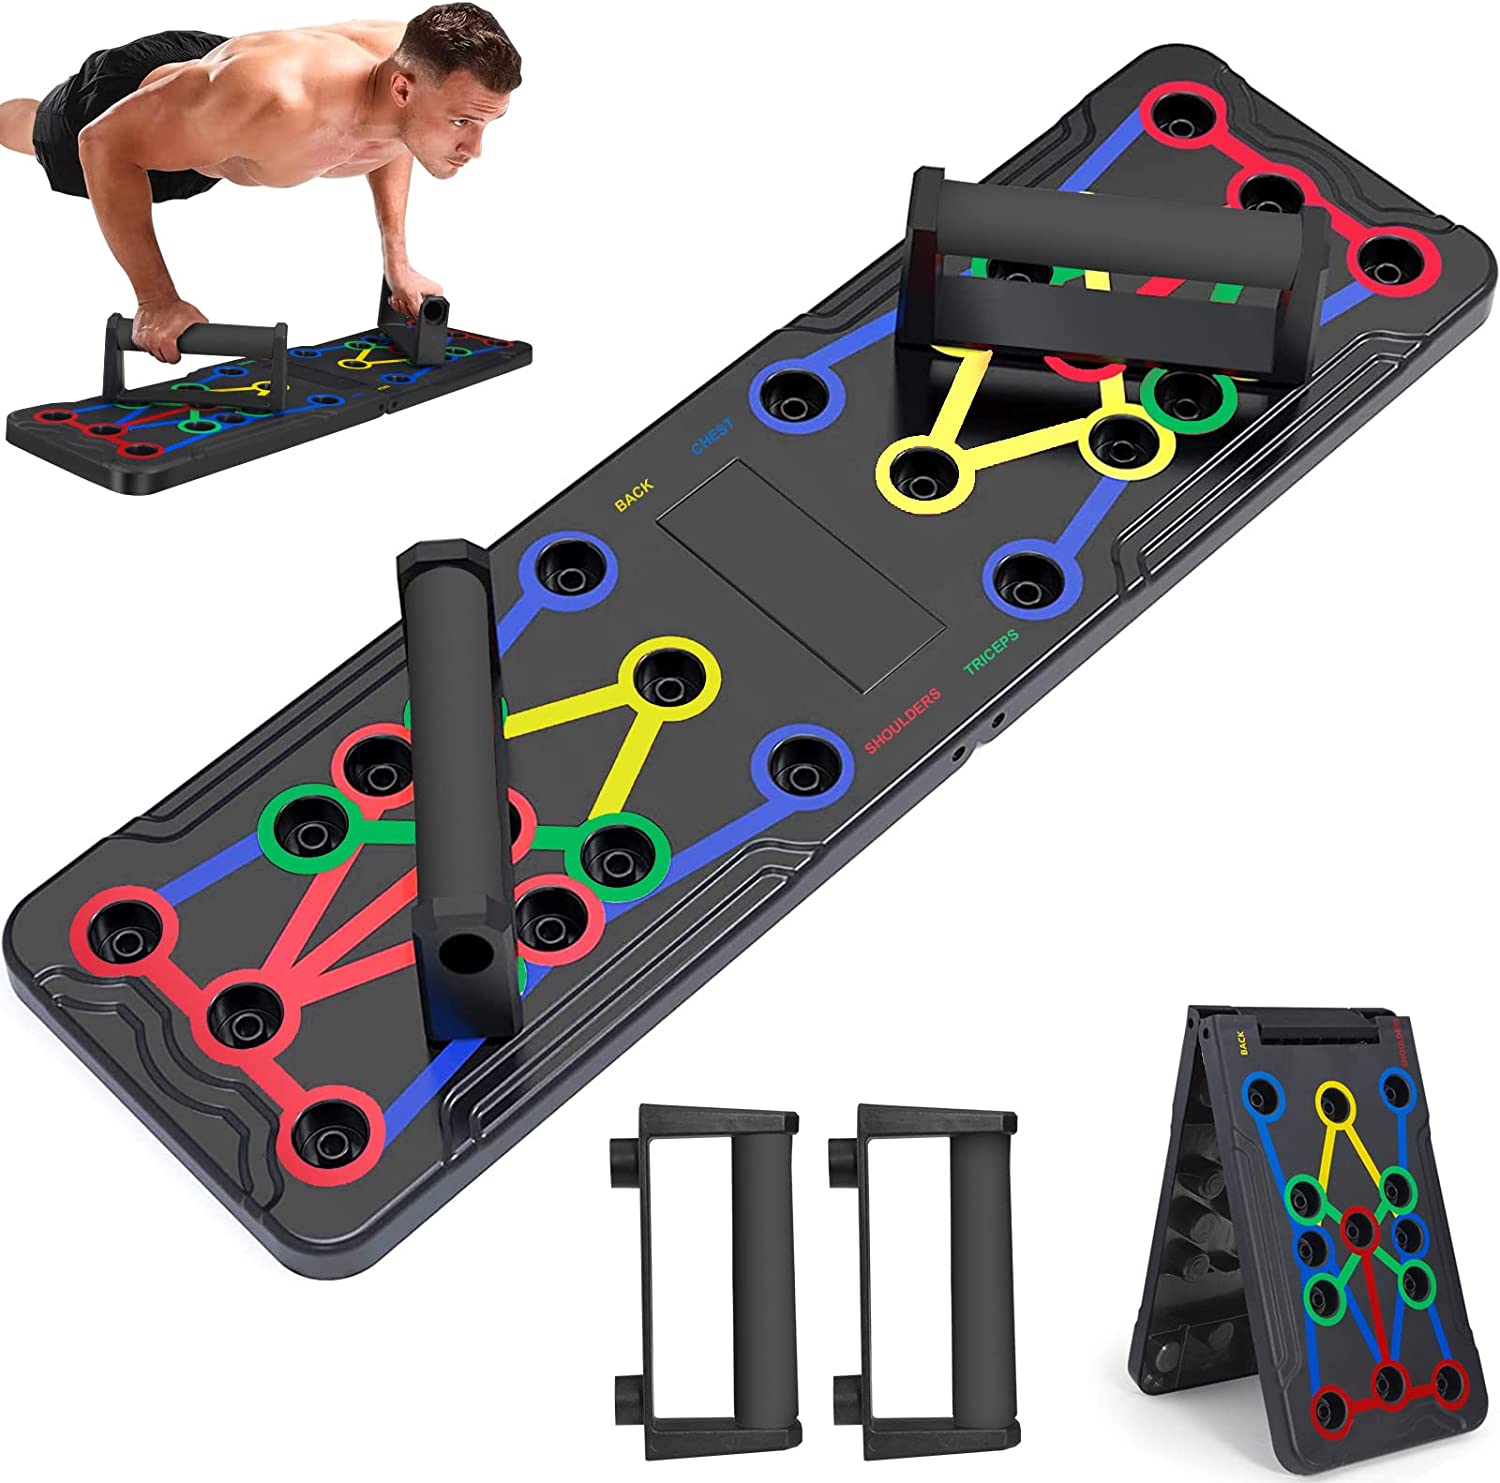 Push Up Board, Foldable Pushup Fitness Stand for Portable Strength Training. Rugged, Stable Equipment for Home Gym Workout for Men & Women, Gift for Boyfriend